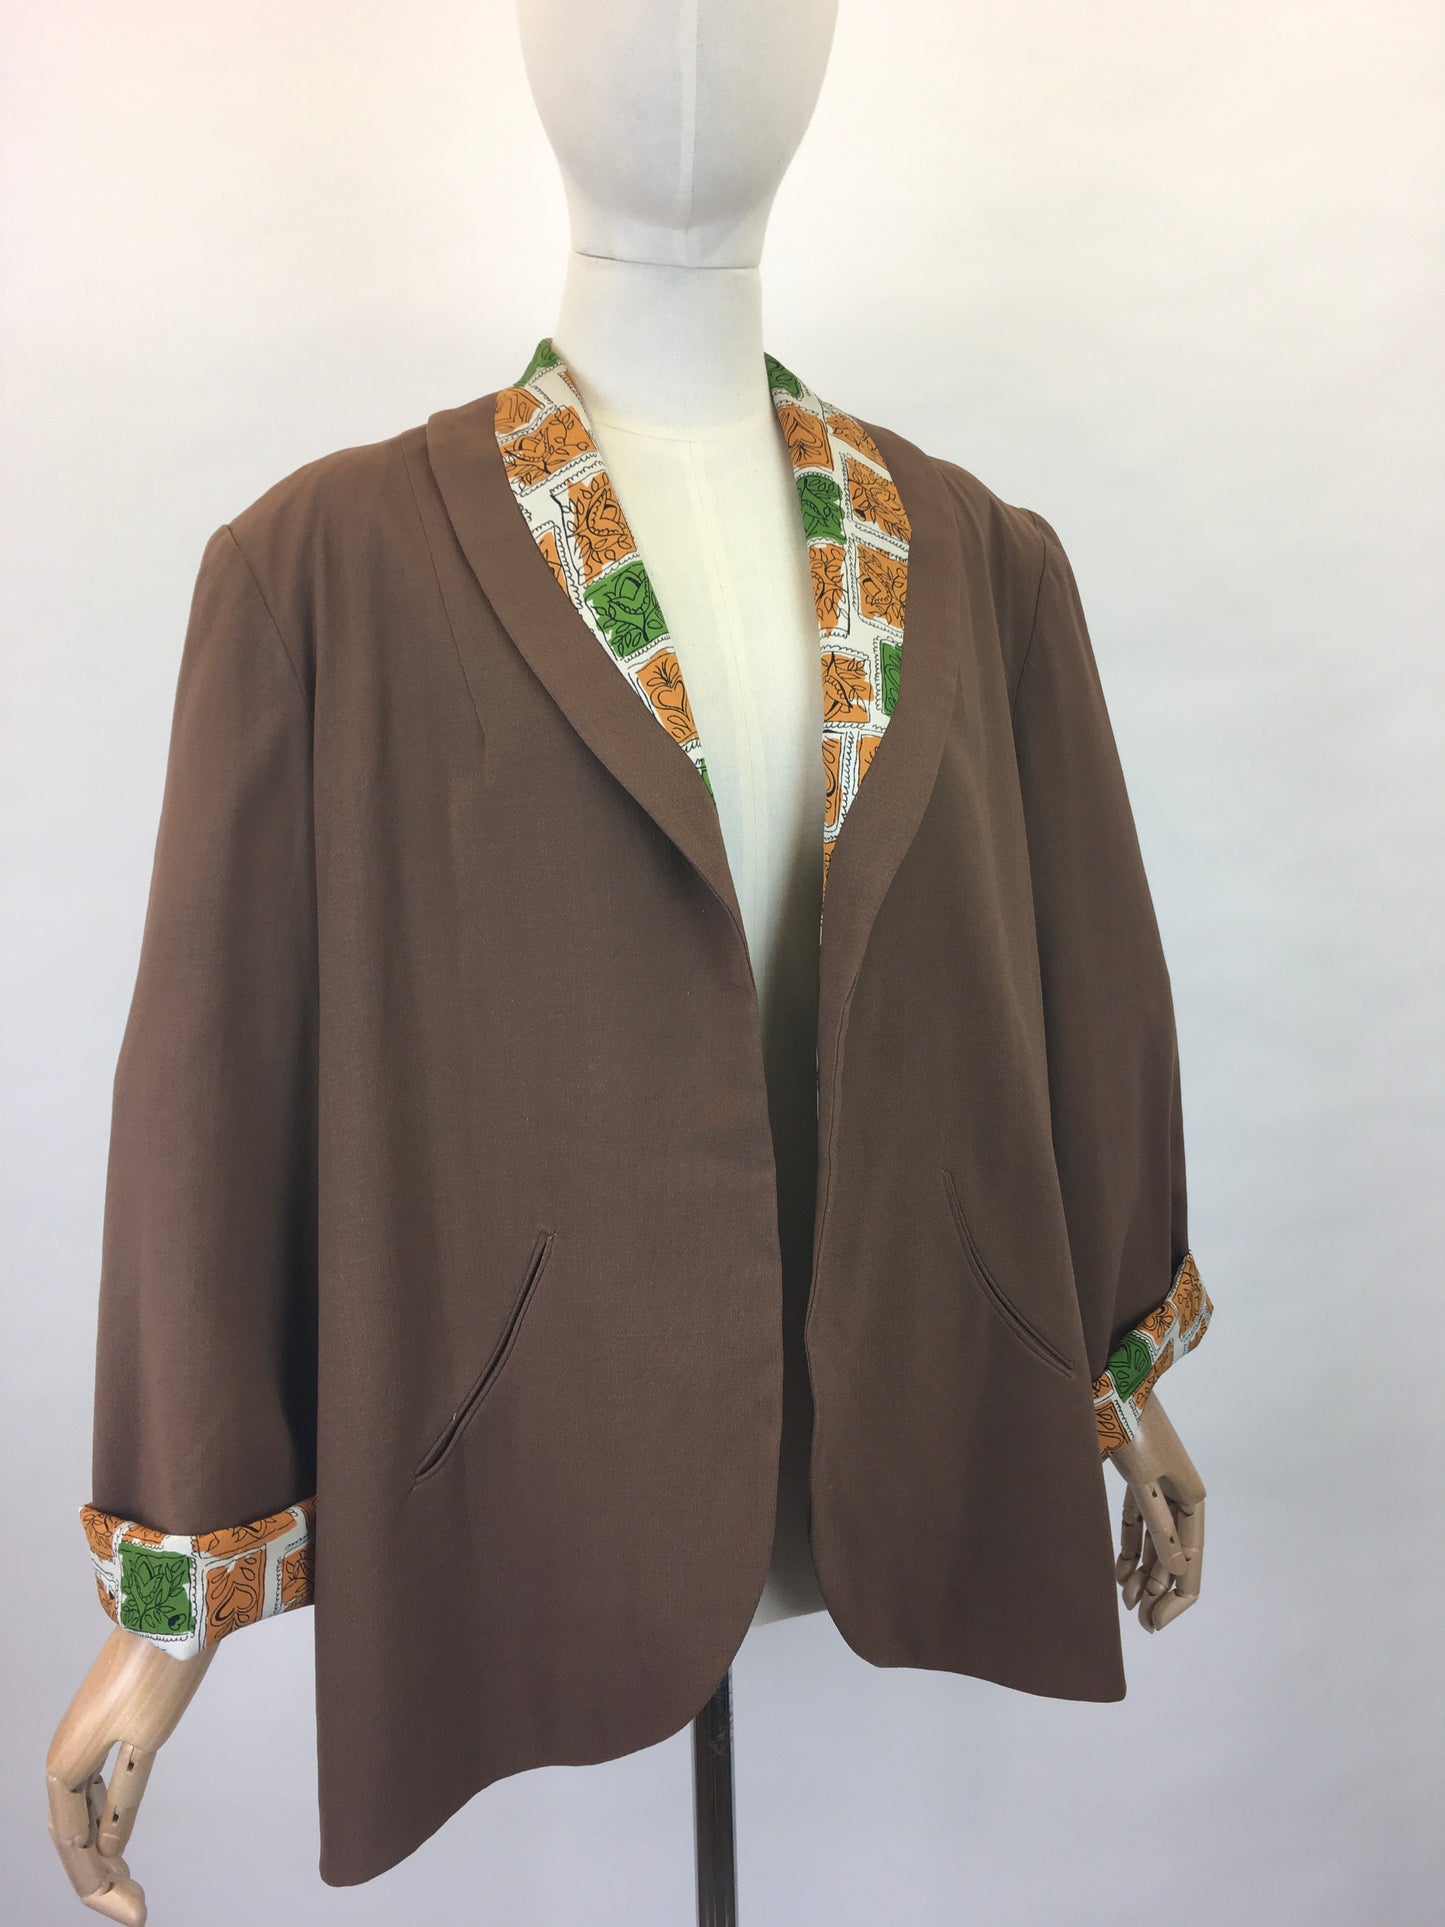 Original 1940s Brown Linen Swing Jacket - With a Fabulous Contrast Rayon Lining in Bright Oranges and Greens